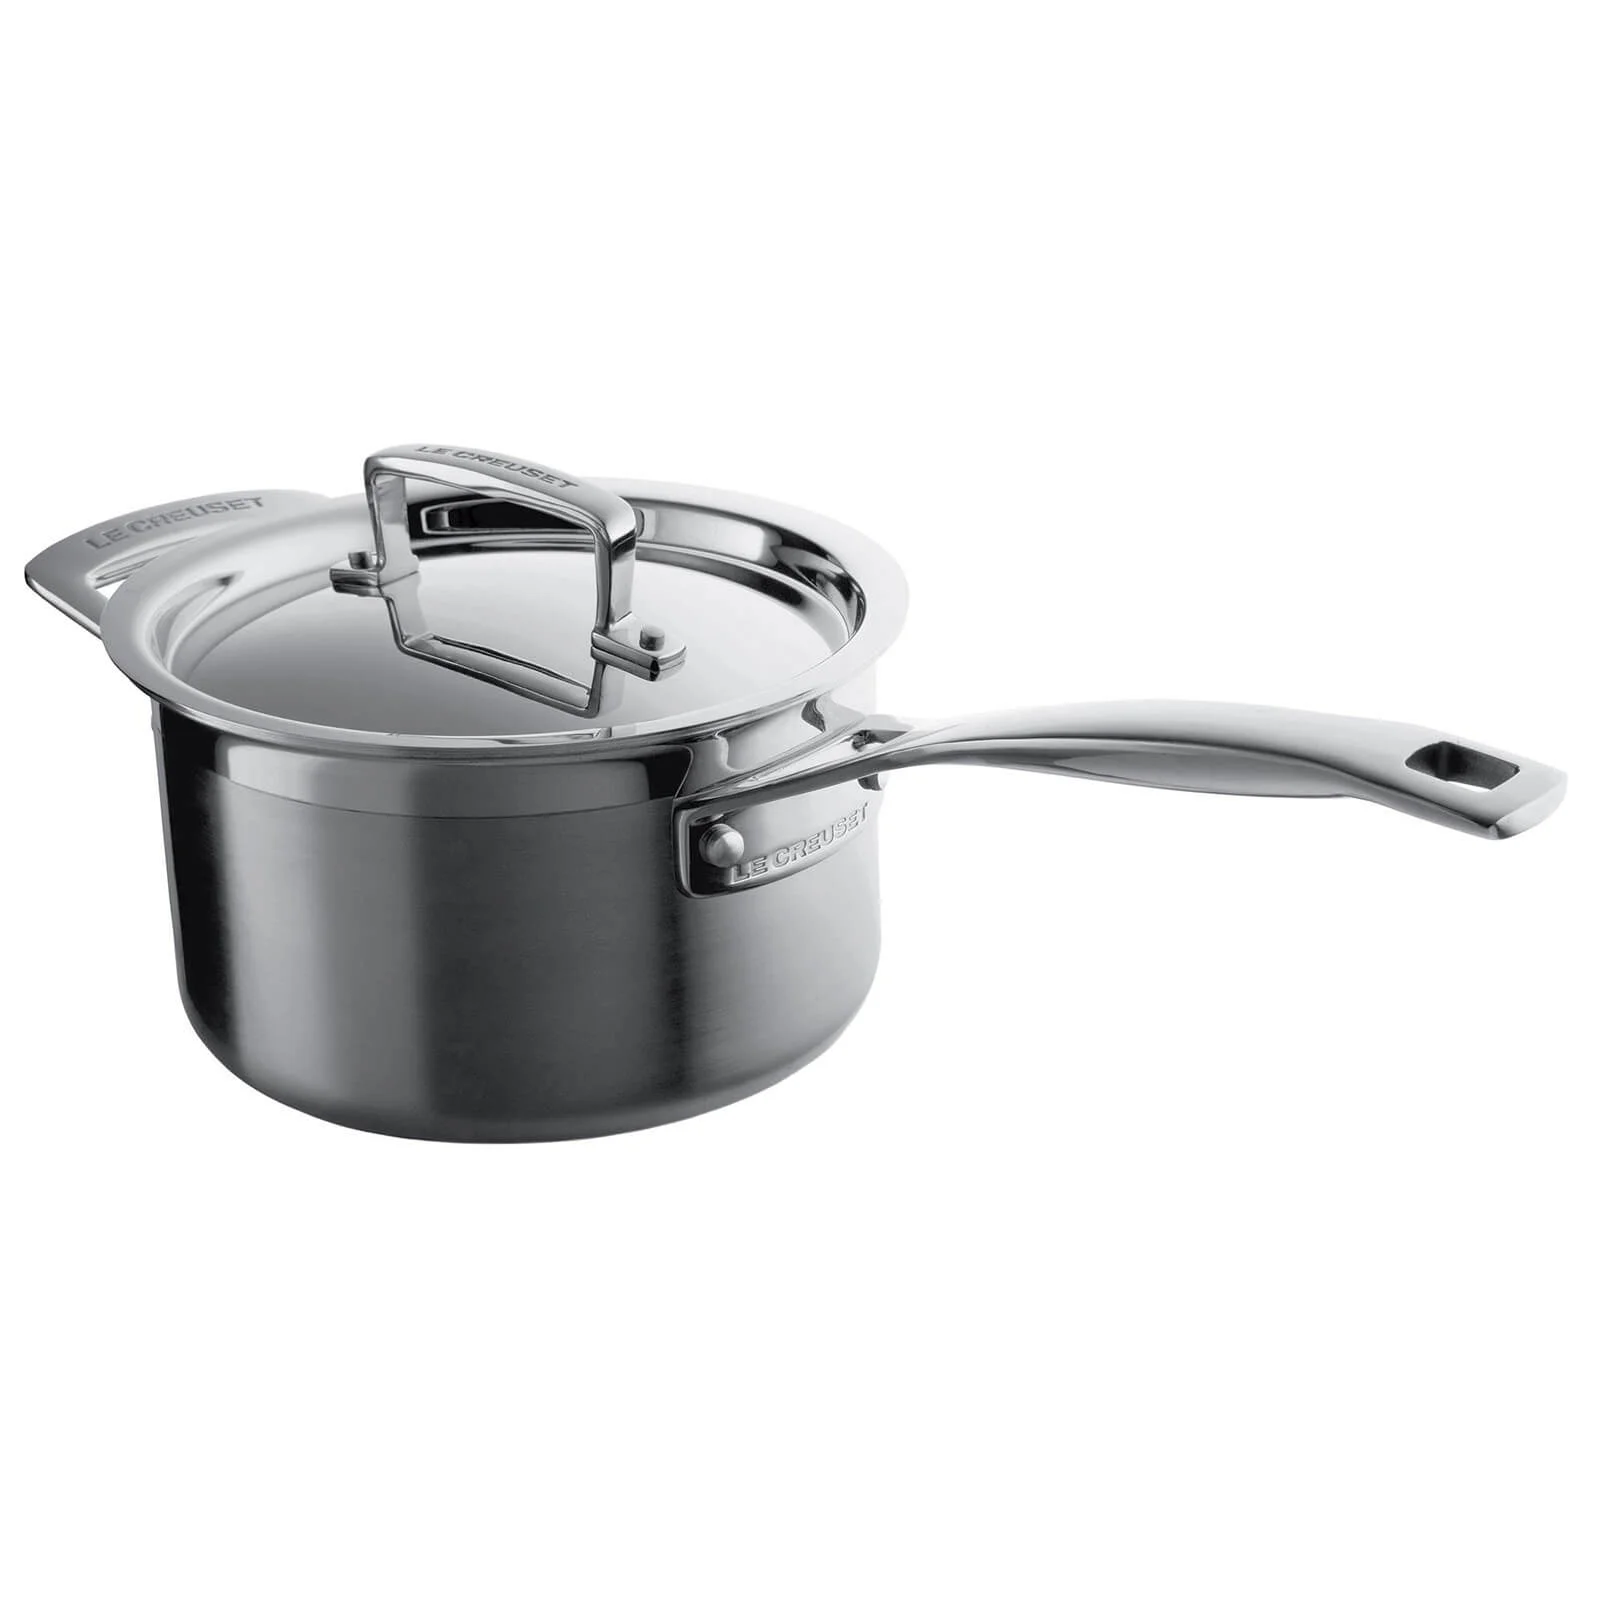 Le Creuset 3-Ply Stainless Steel Saucepan with Lid - 20cm Image 1